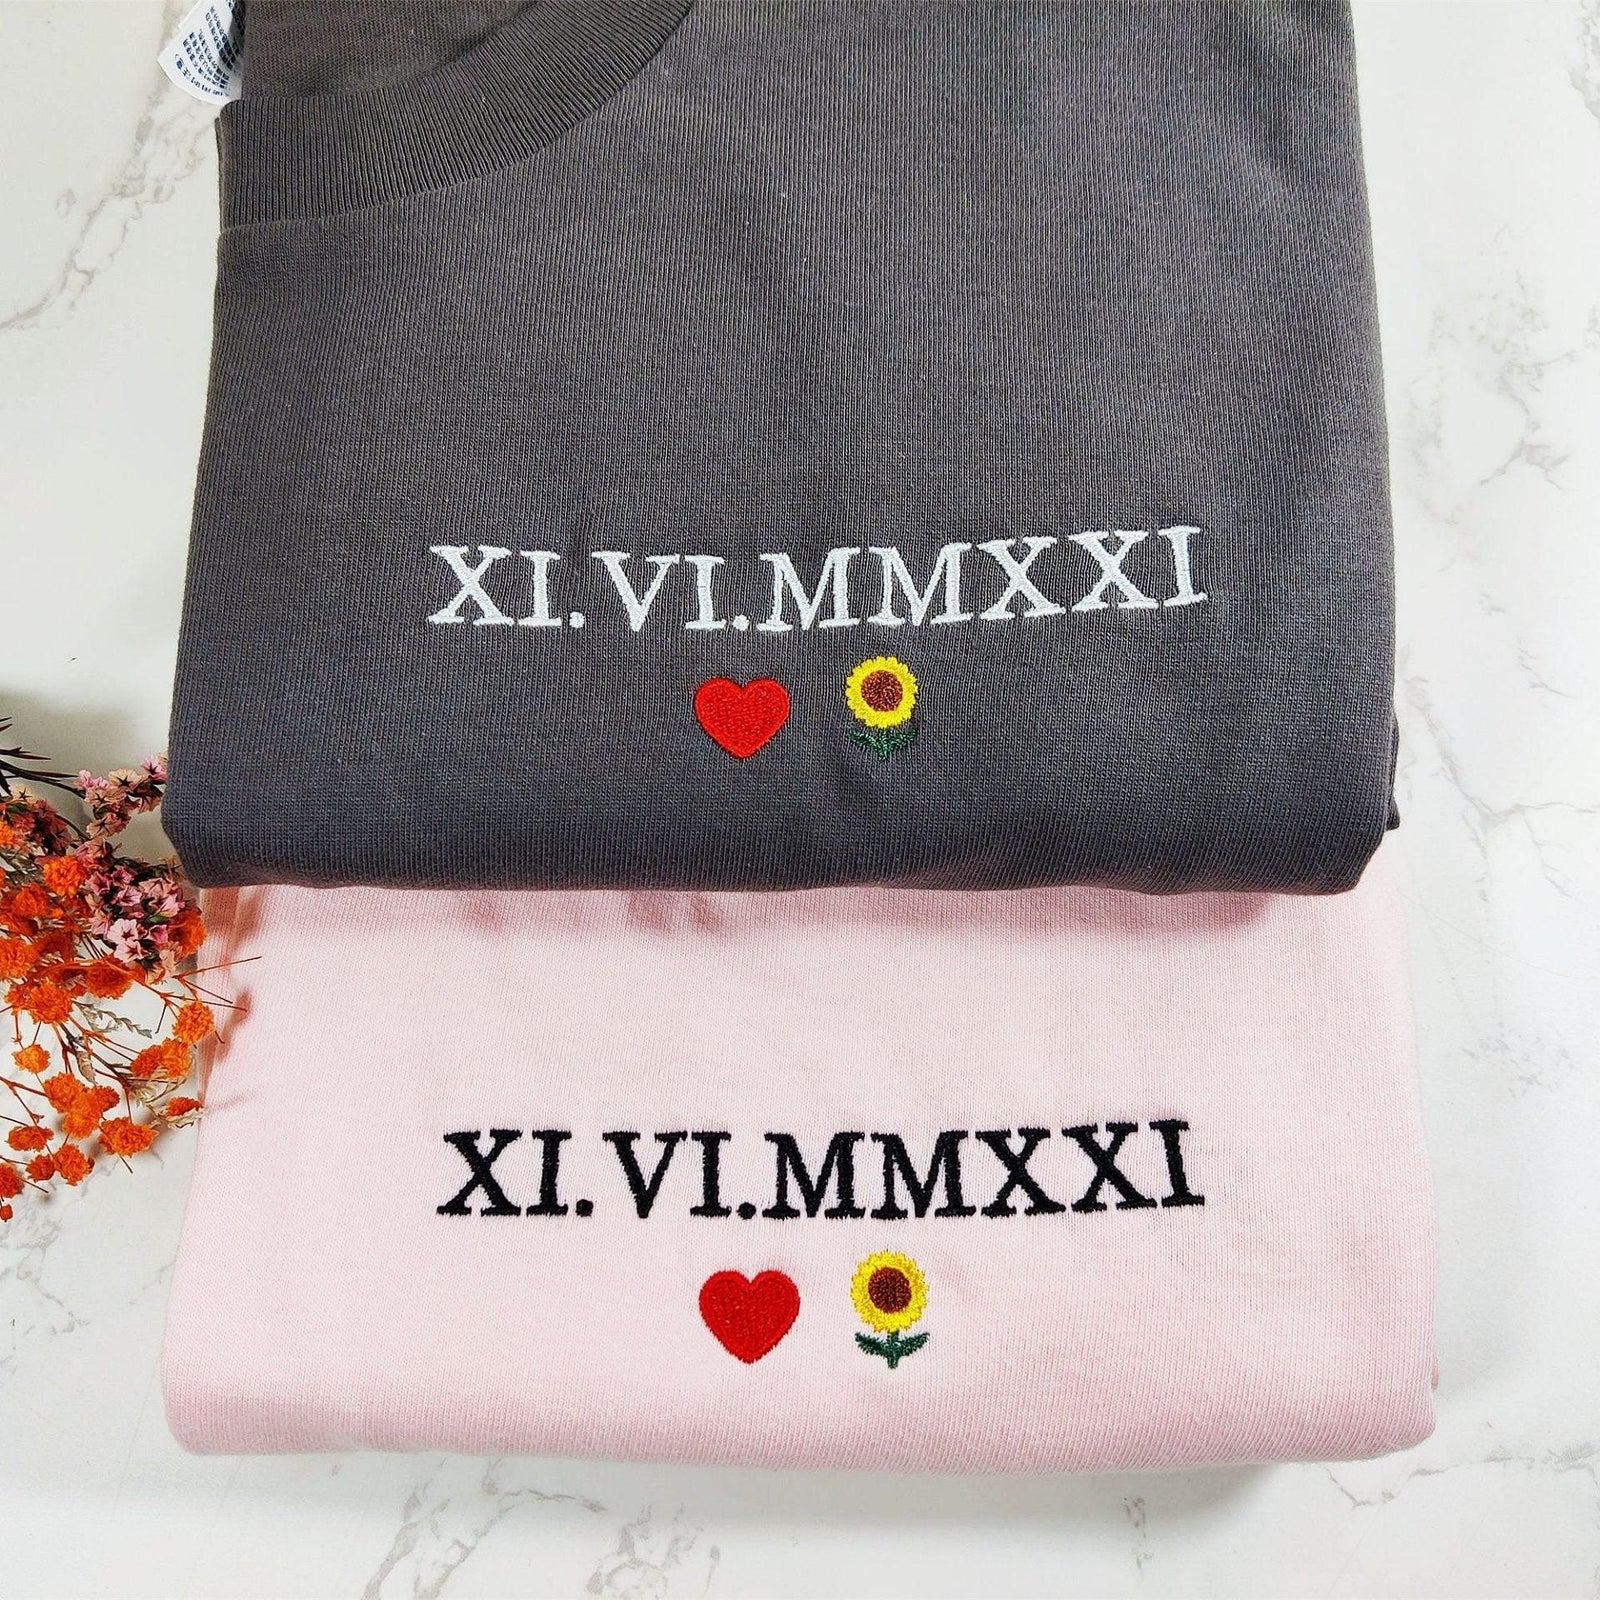 Custom Embroidered Sweatshirts For Couples, Personalized Embroidered Roman Numerals & Heart Flower Anniversary Date Sweatshirt